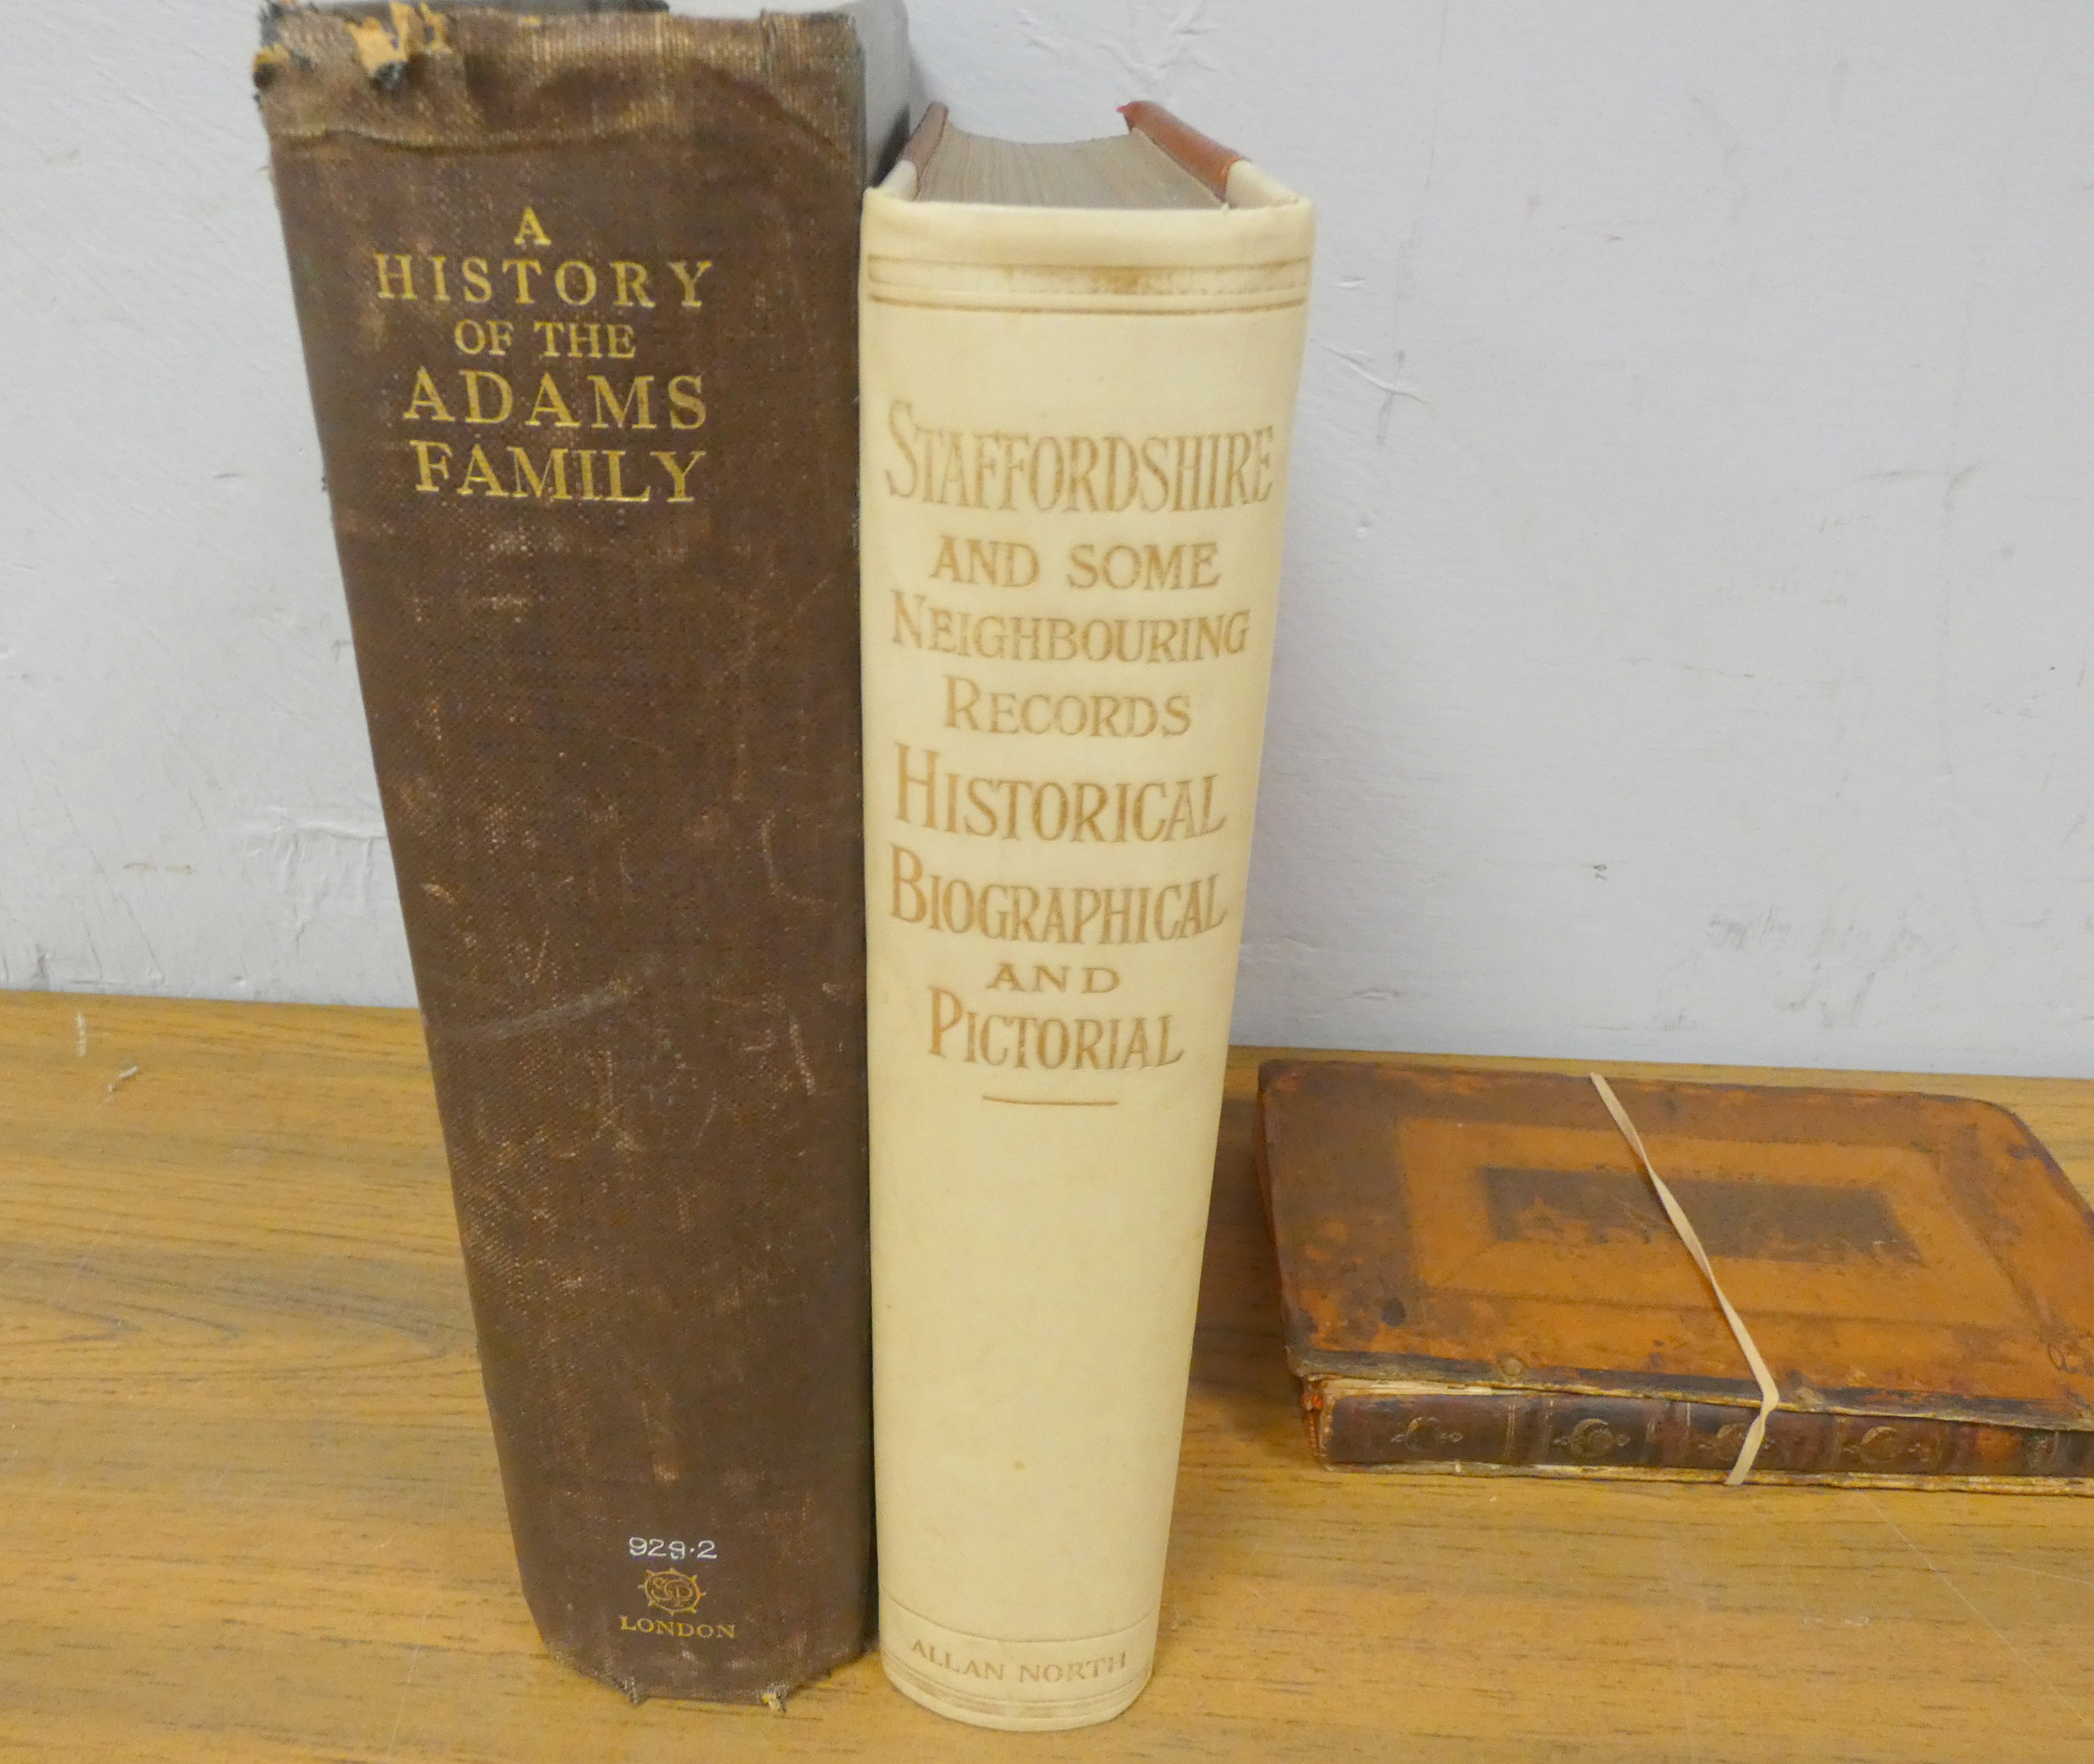 ADAMS P. W. L.  A History of the Adams Family of North Staffordshire & of Their Connection with